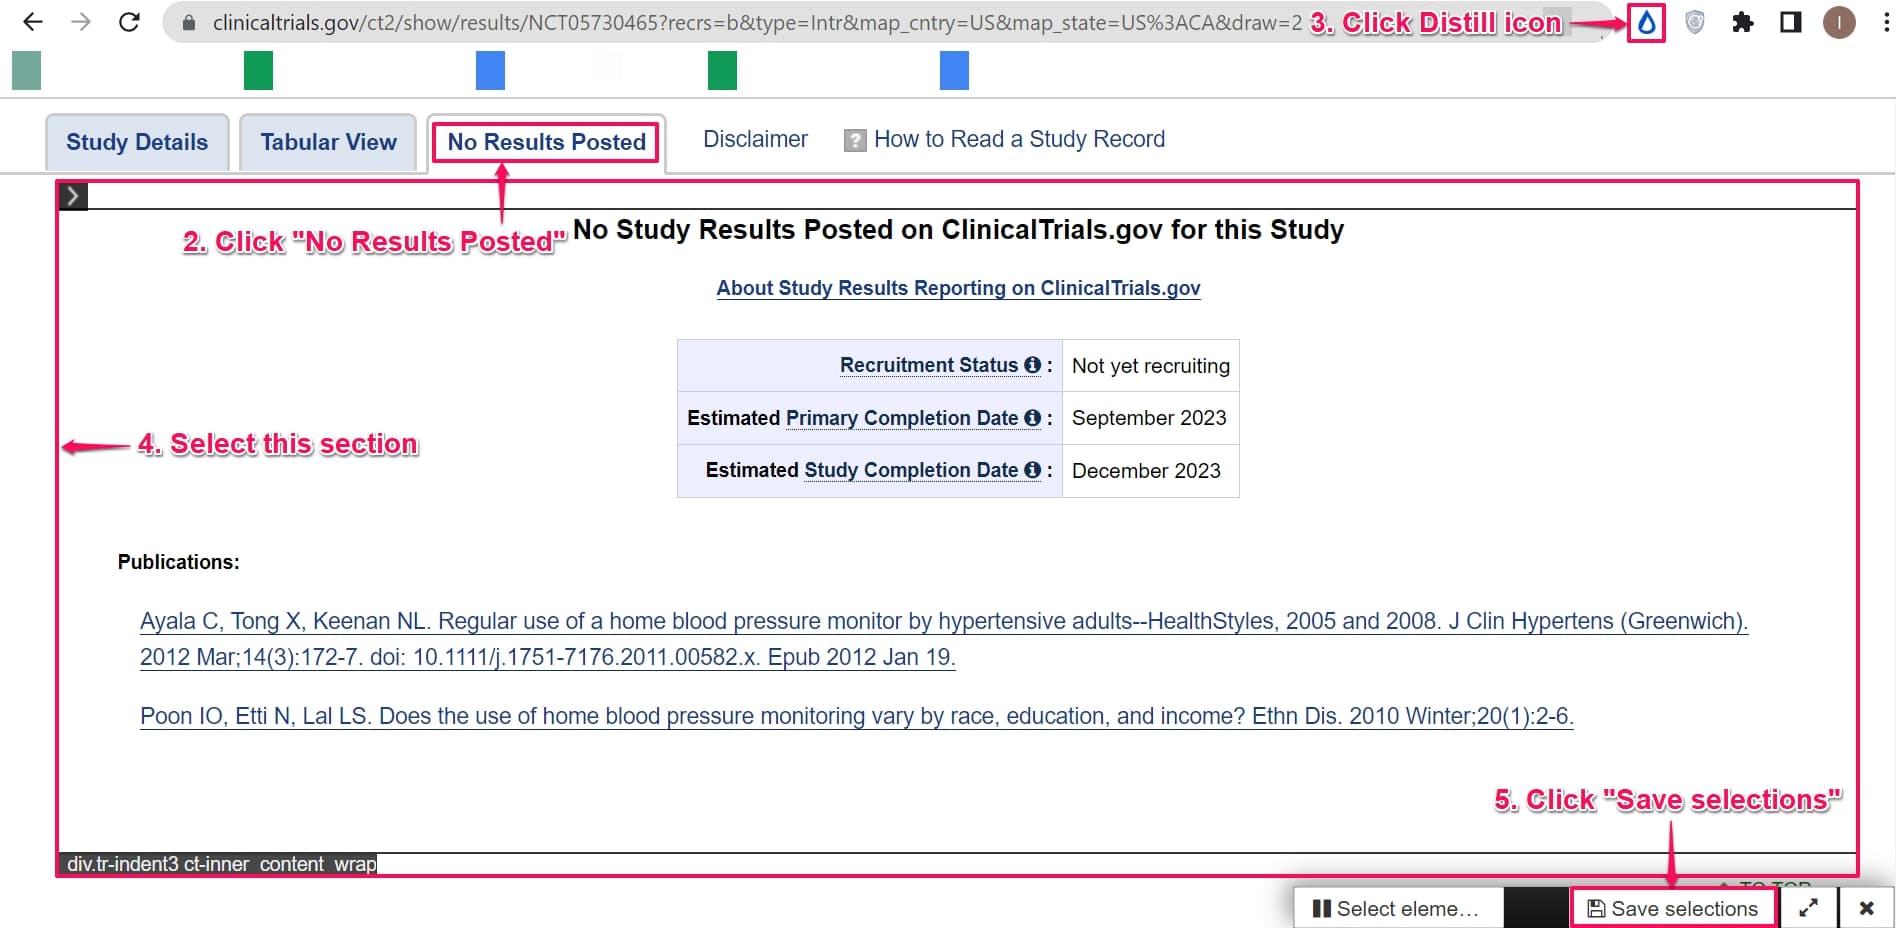 Select results section of clinical trial webpage